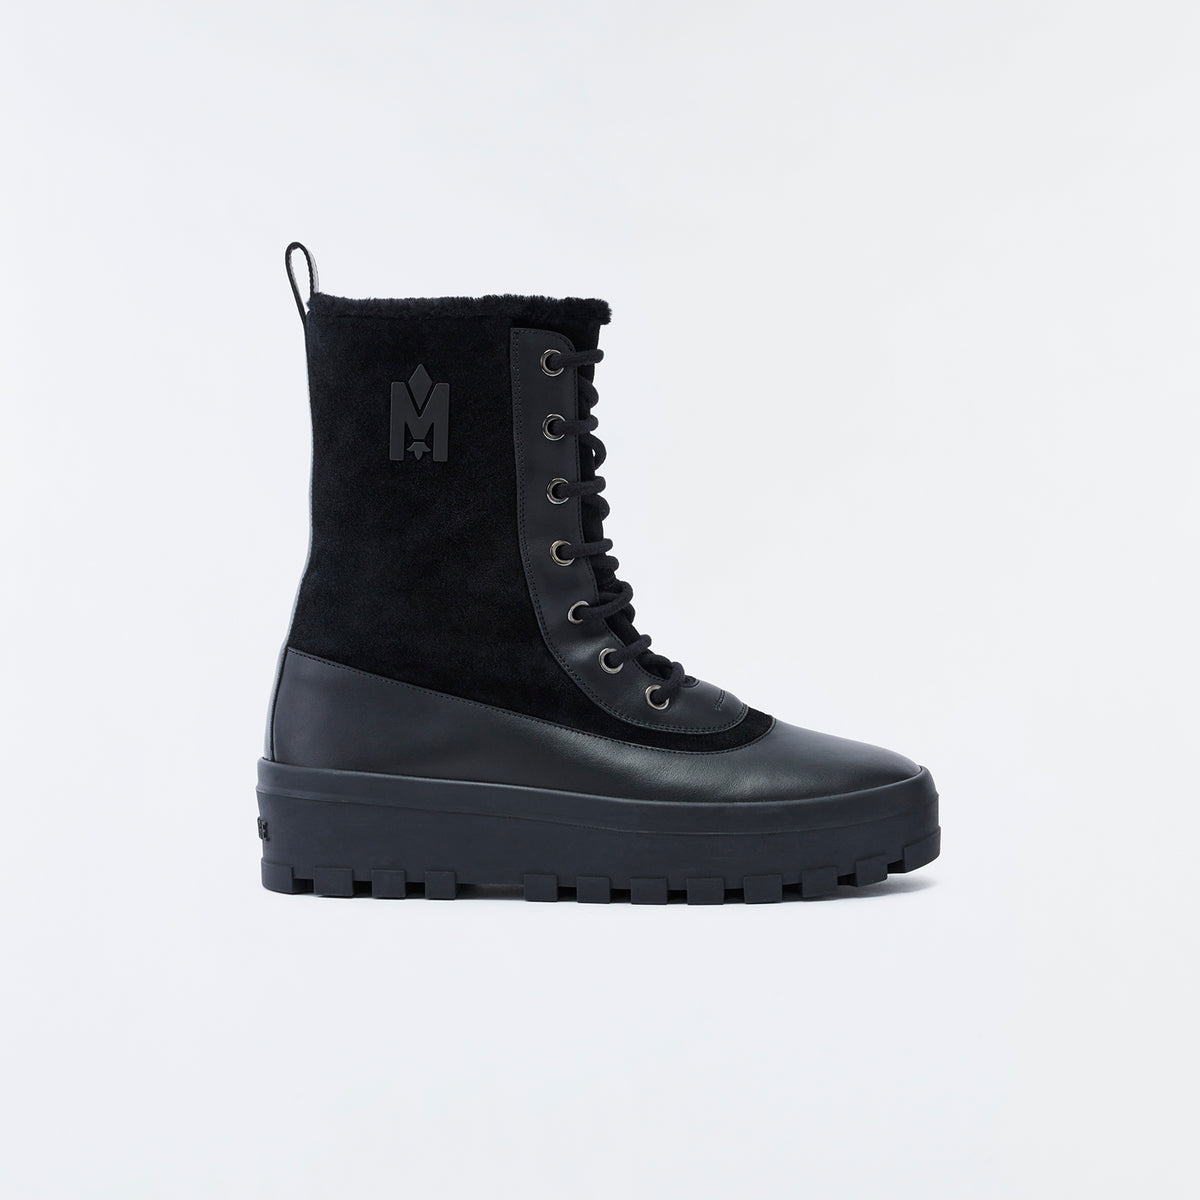 Hero, Shearling-lined lamb suede winter boot for ladies | Mackage